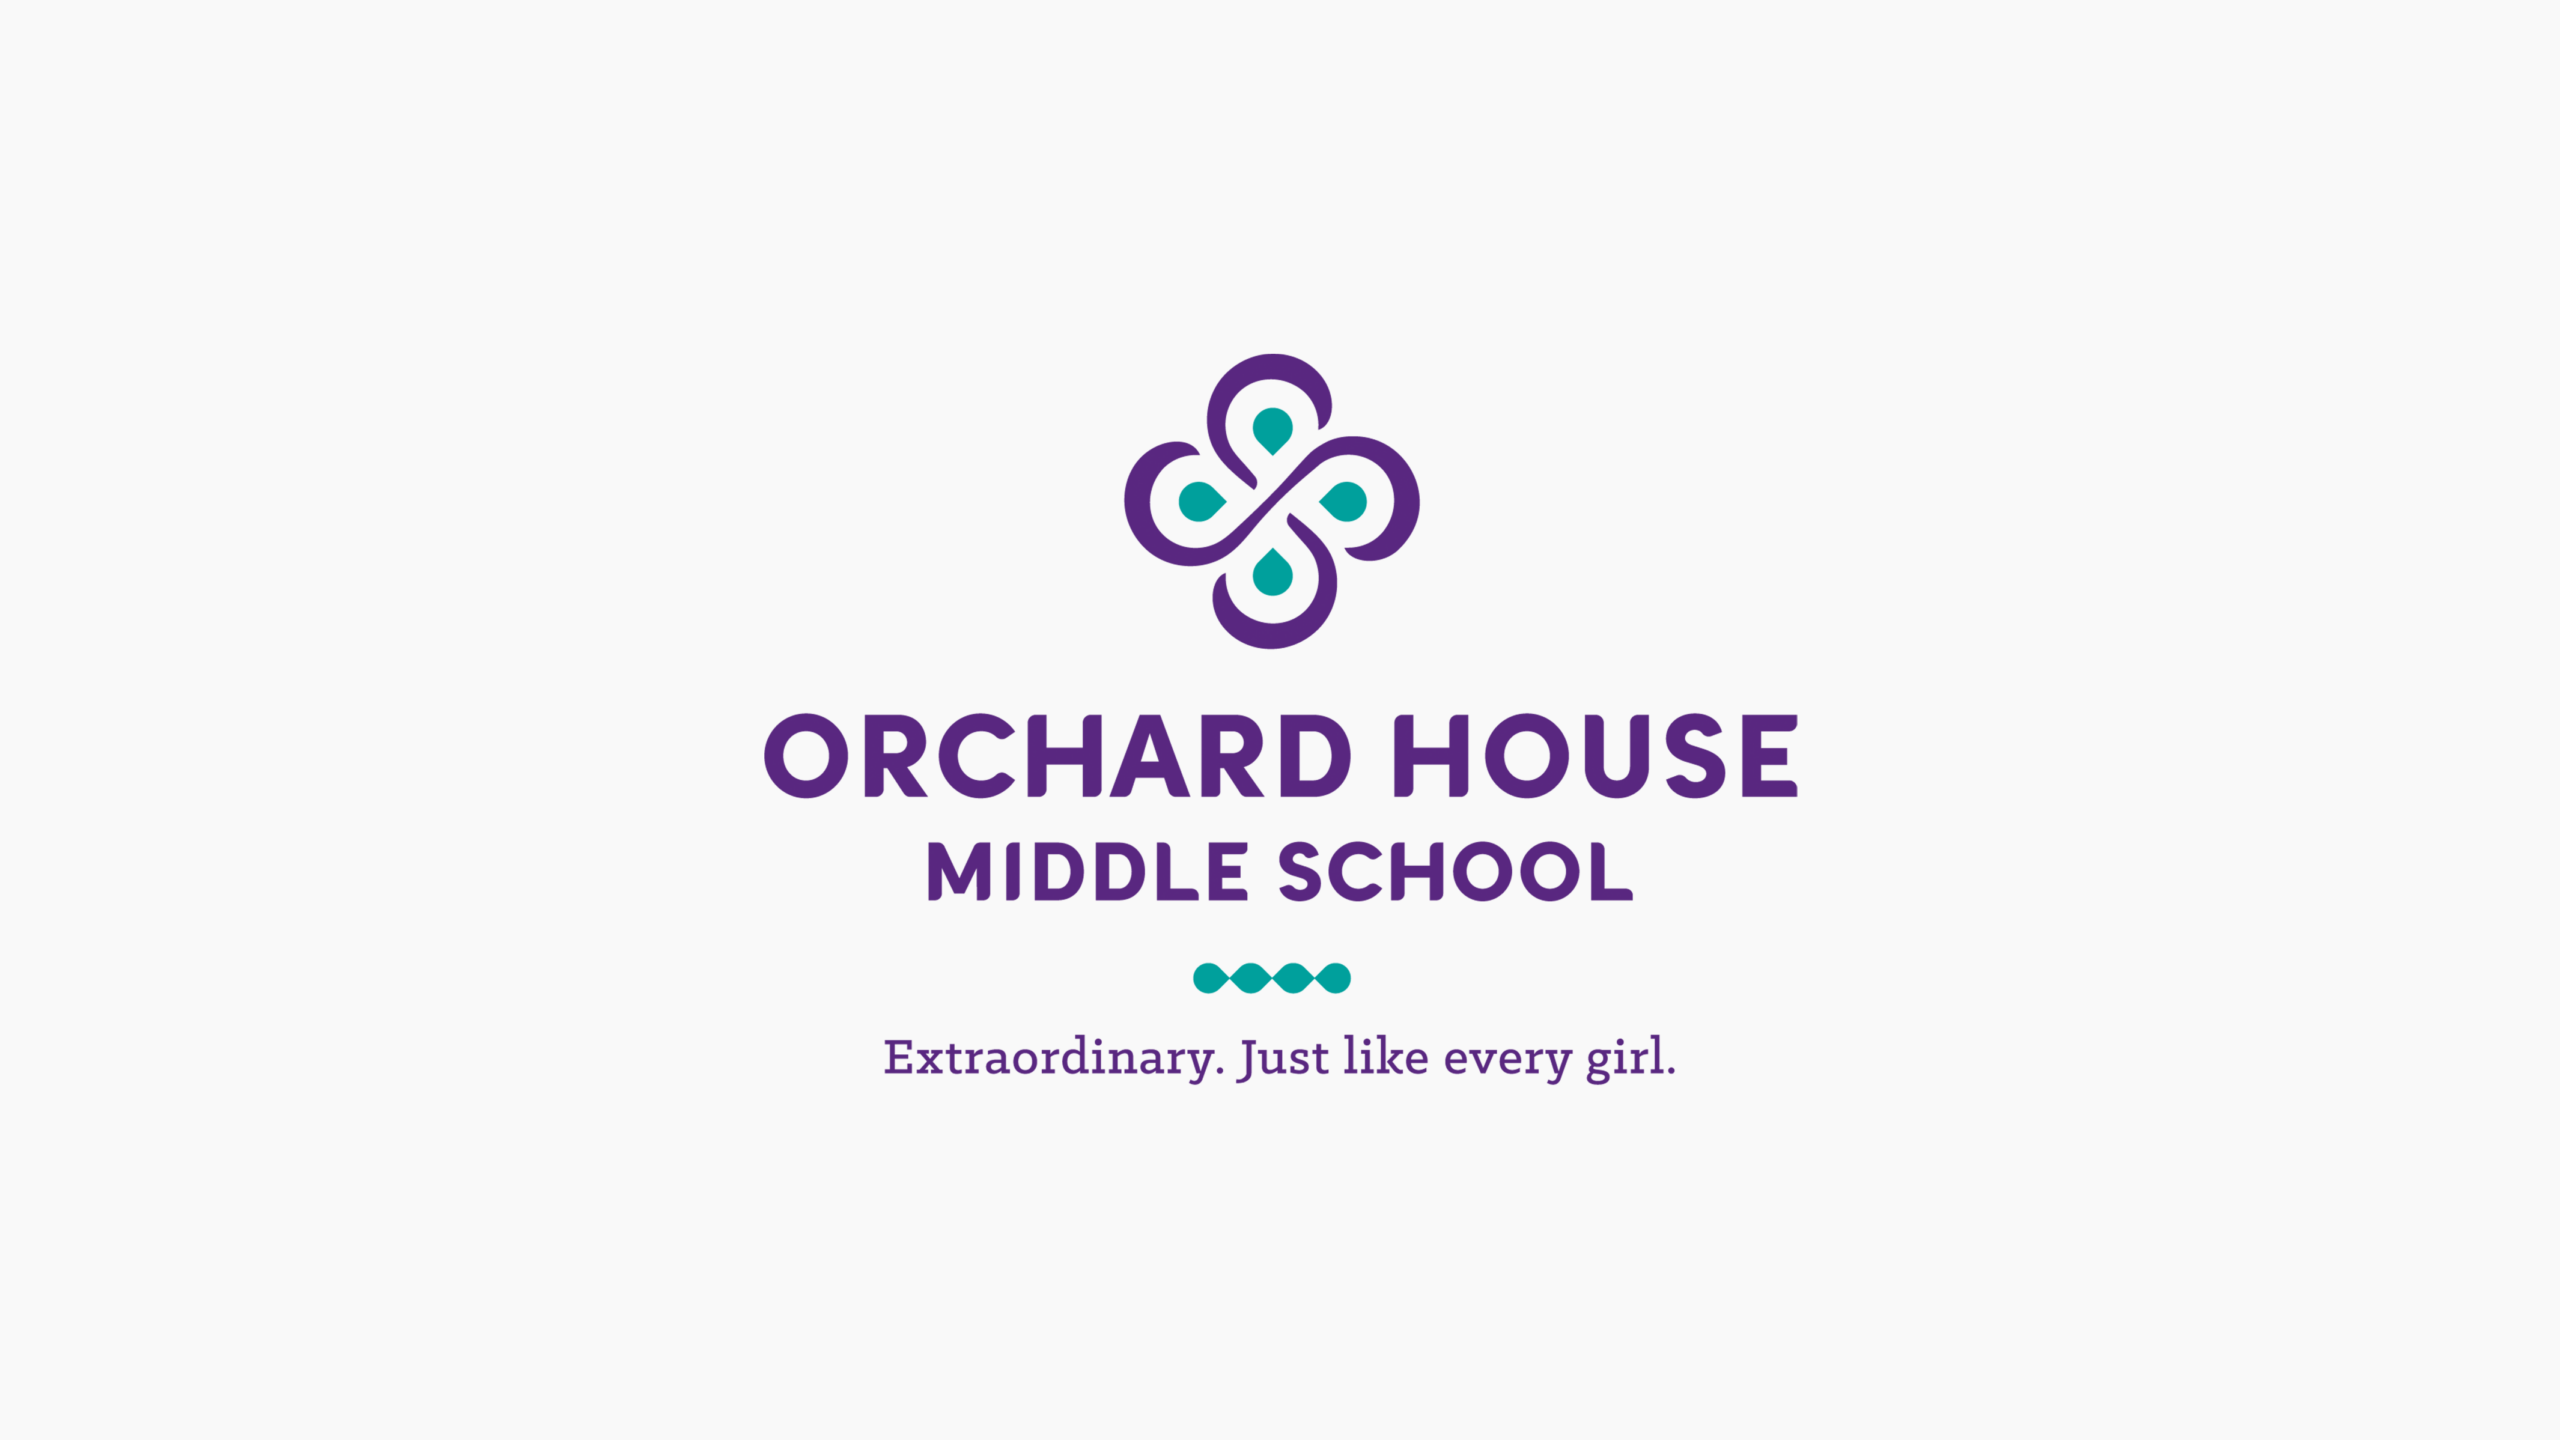 Revised logo for Orchard House Middle School